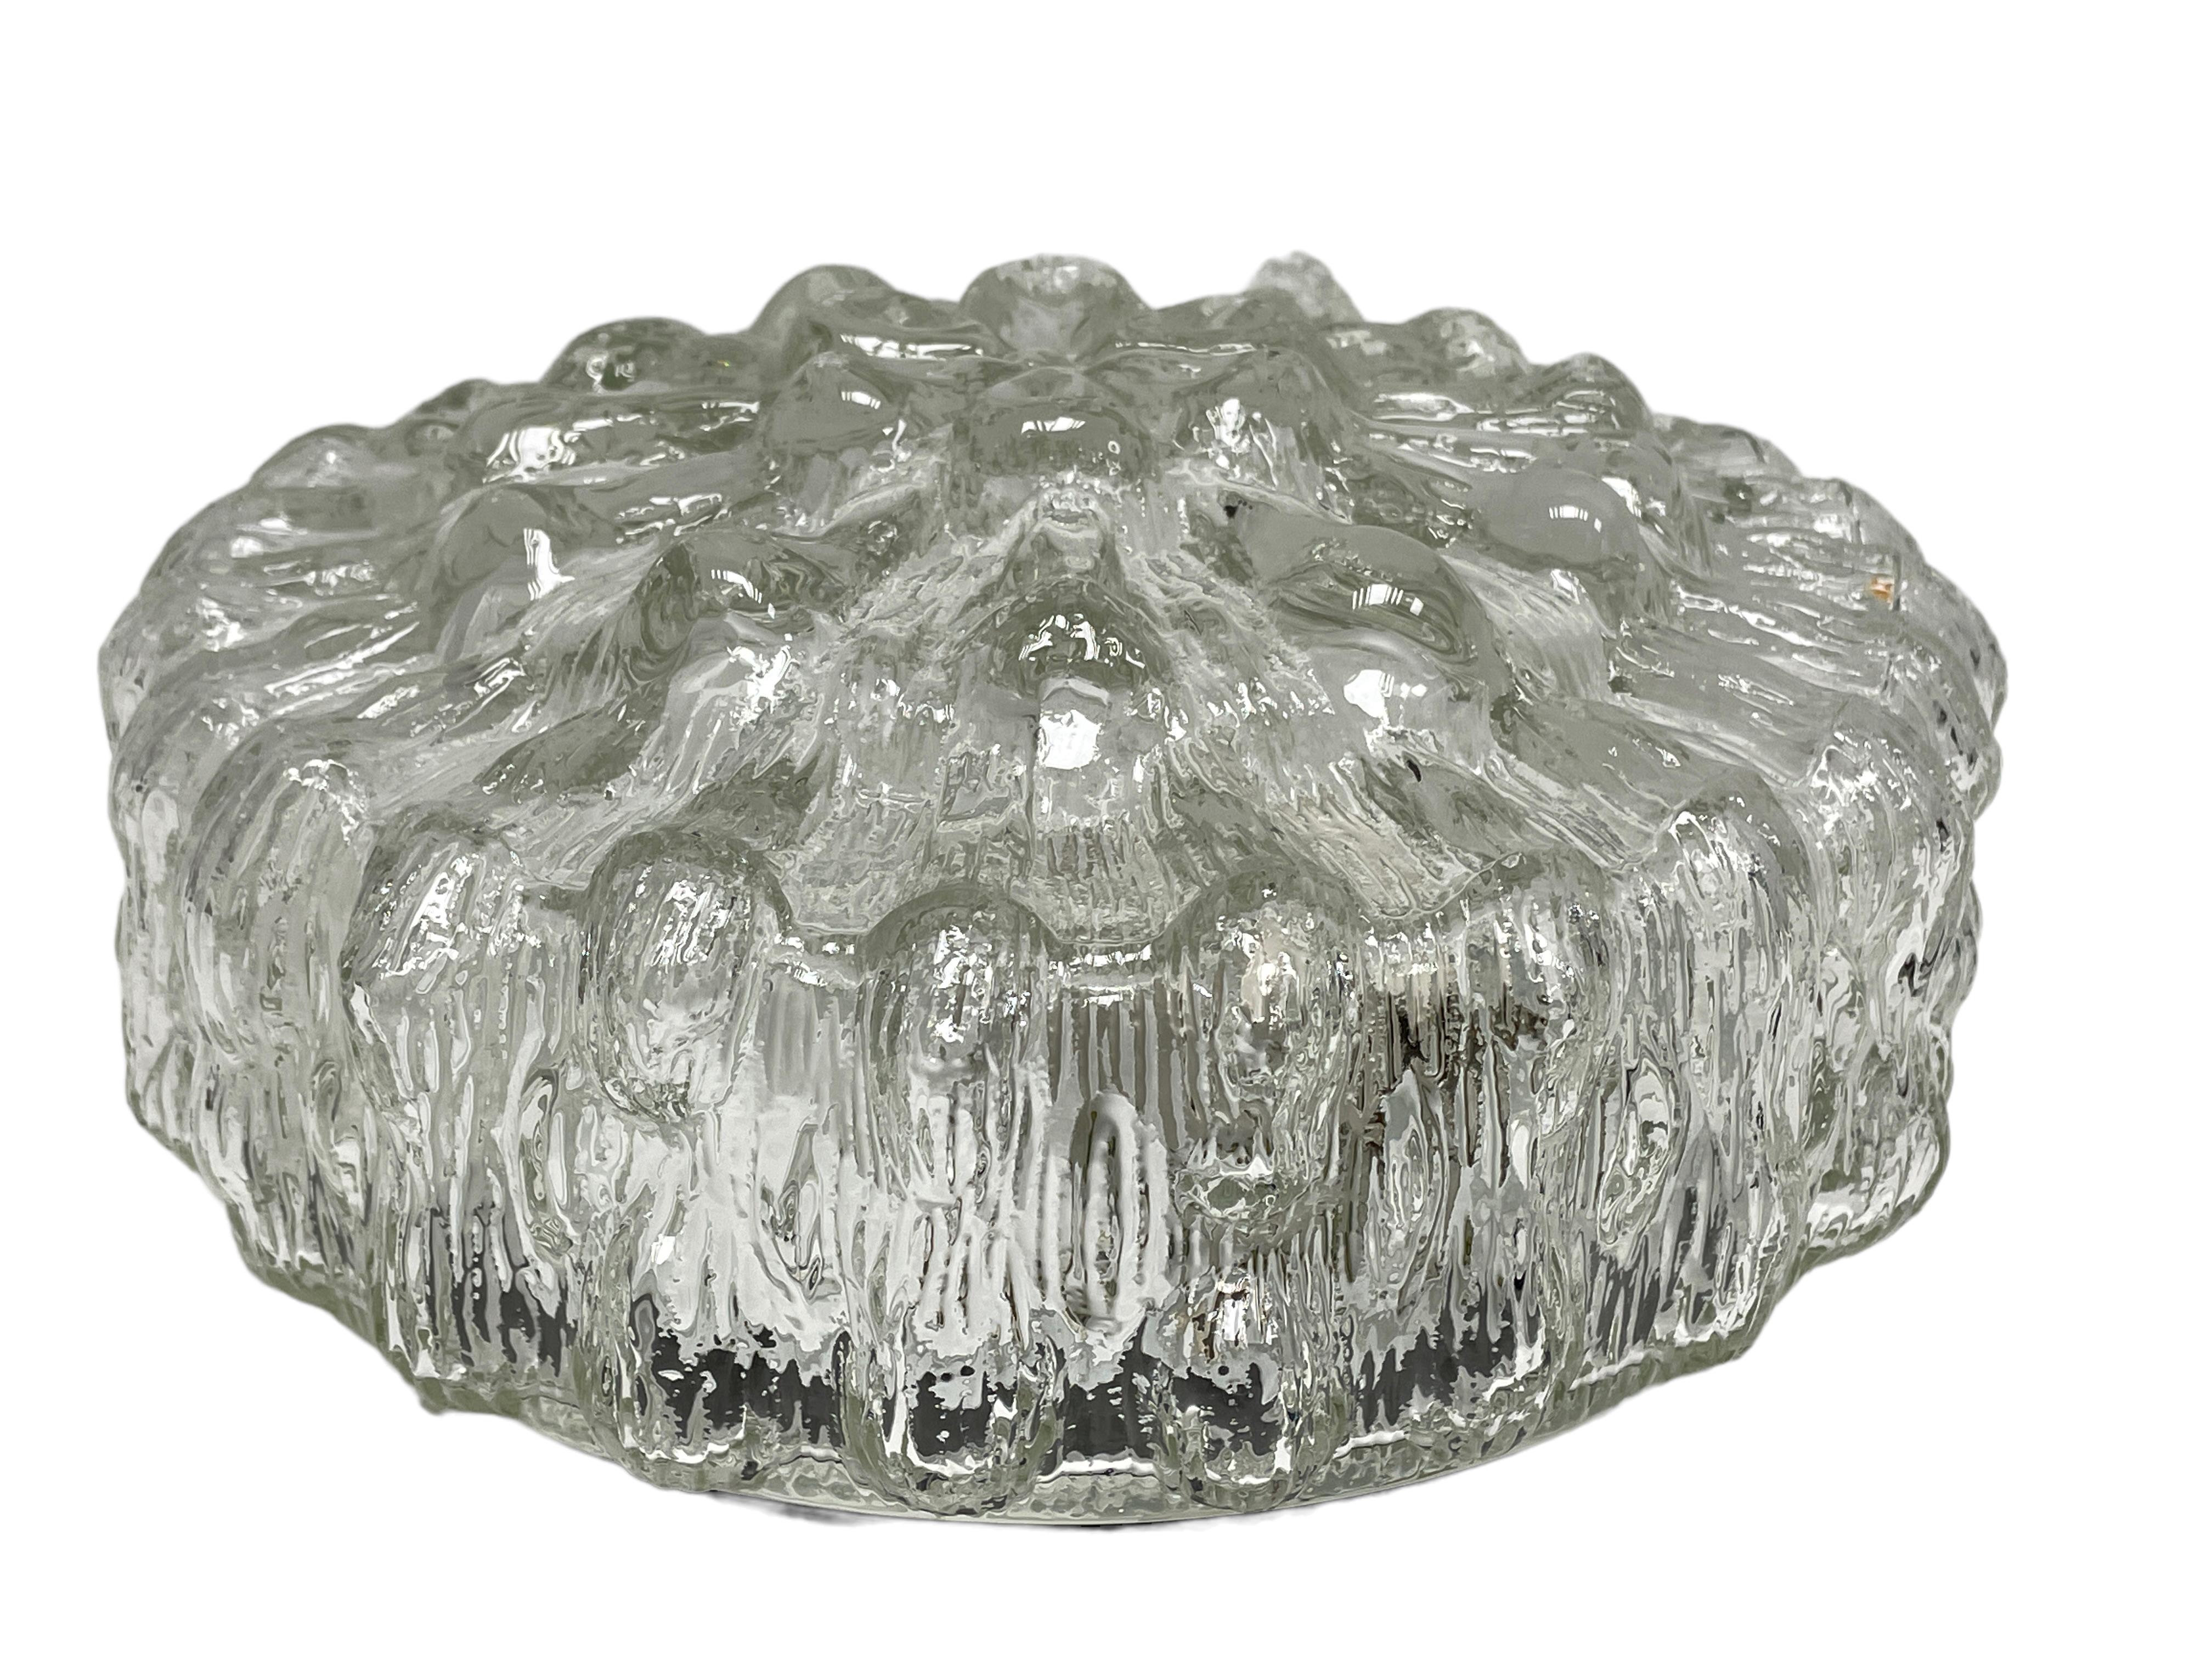 Beautiful organic glass flush mount. Made in Germany attributed to Glashütte Limburg. Gorgeous textured glass flush mount with metal fixture. The fixture requires one European E27 Edison or medium bulb up to 75 watts. A nice addition to any room.